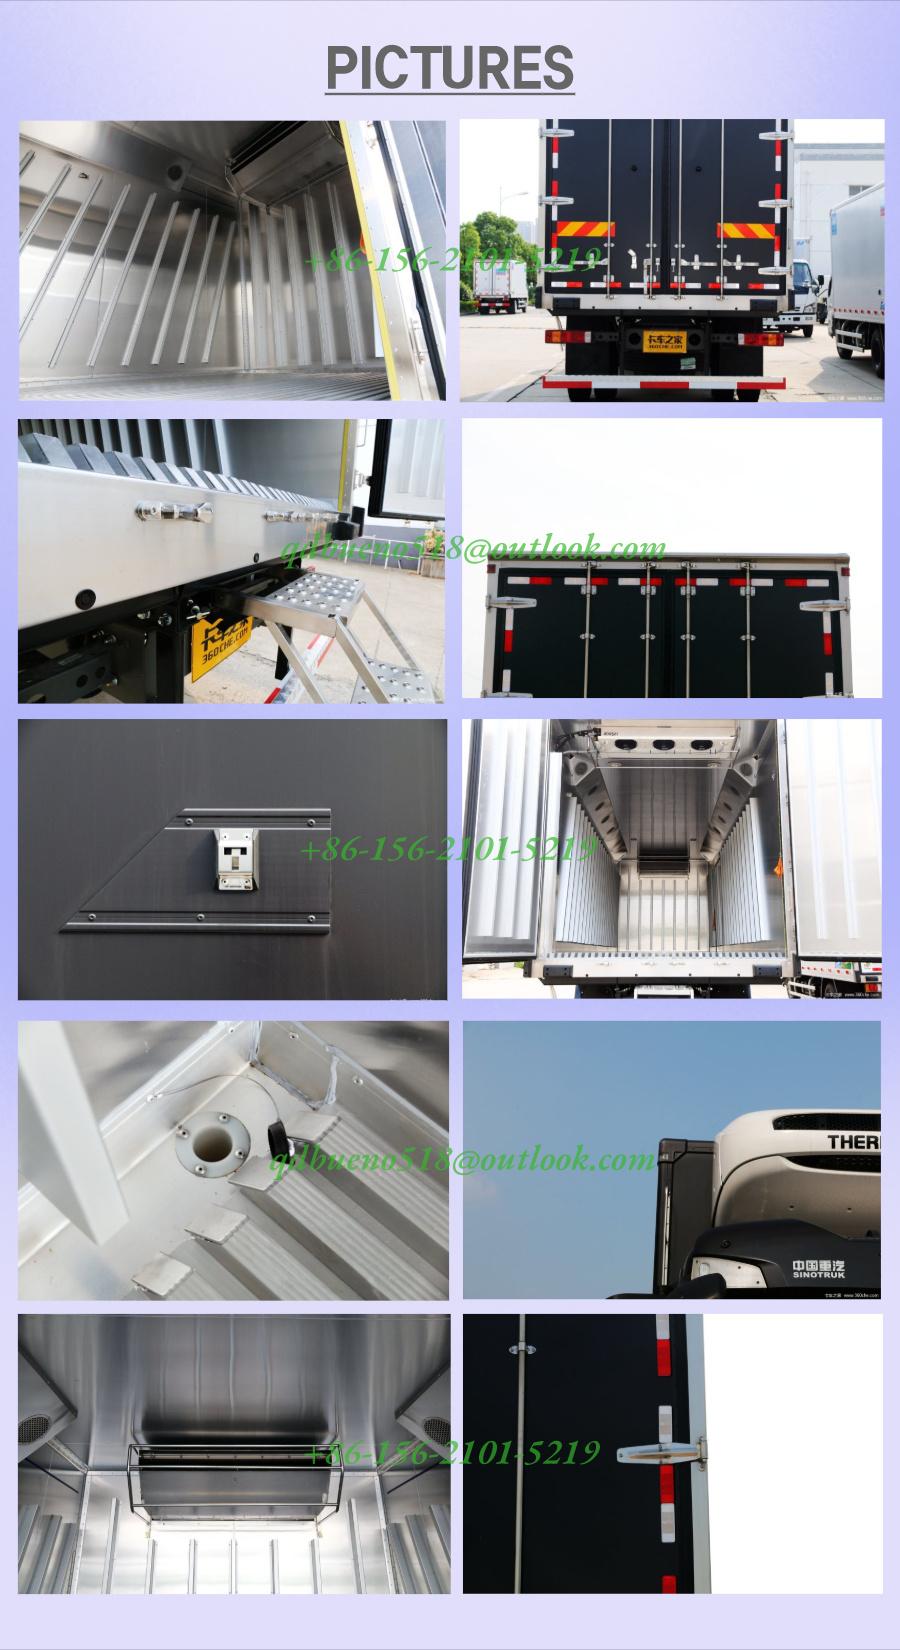 Sinotruk HOWO Frozen Trucks Small Cargo Food Delivery Refrigerated Truck Customized Box Length and Refrigerated Temperature